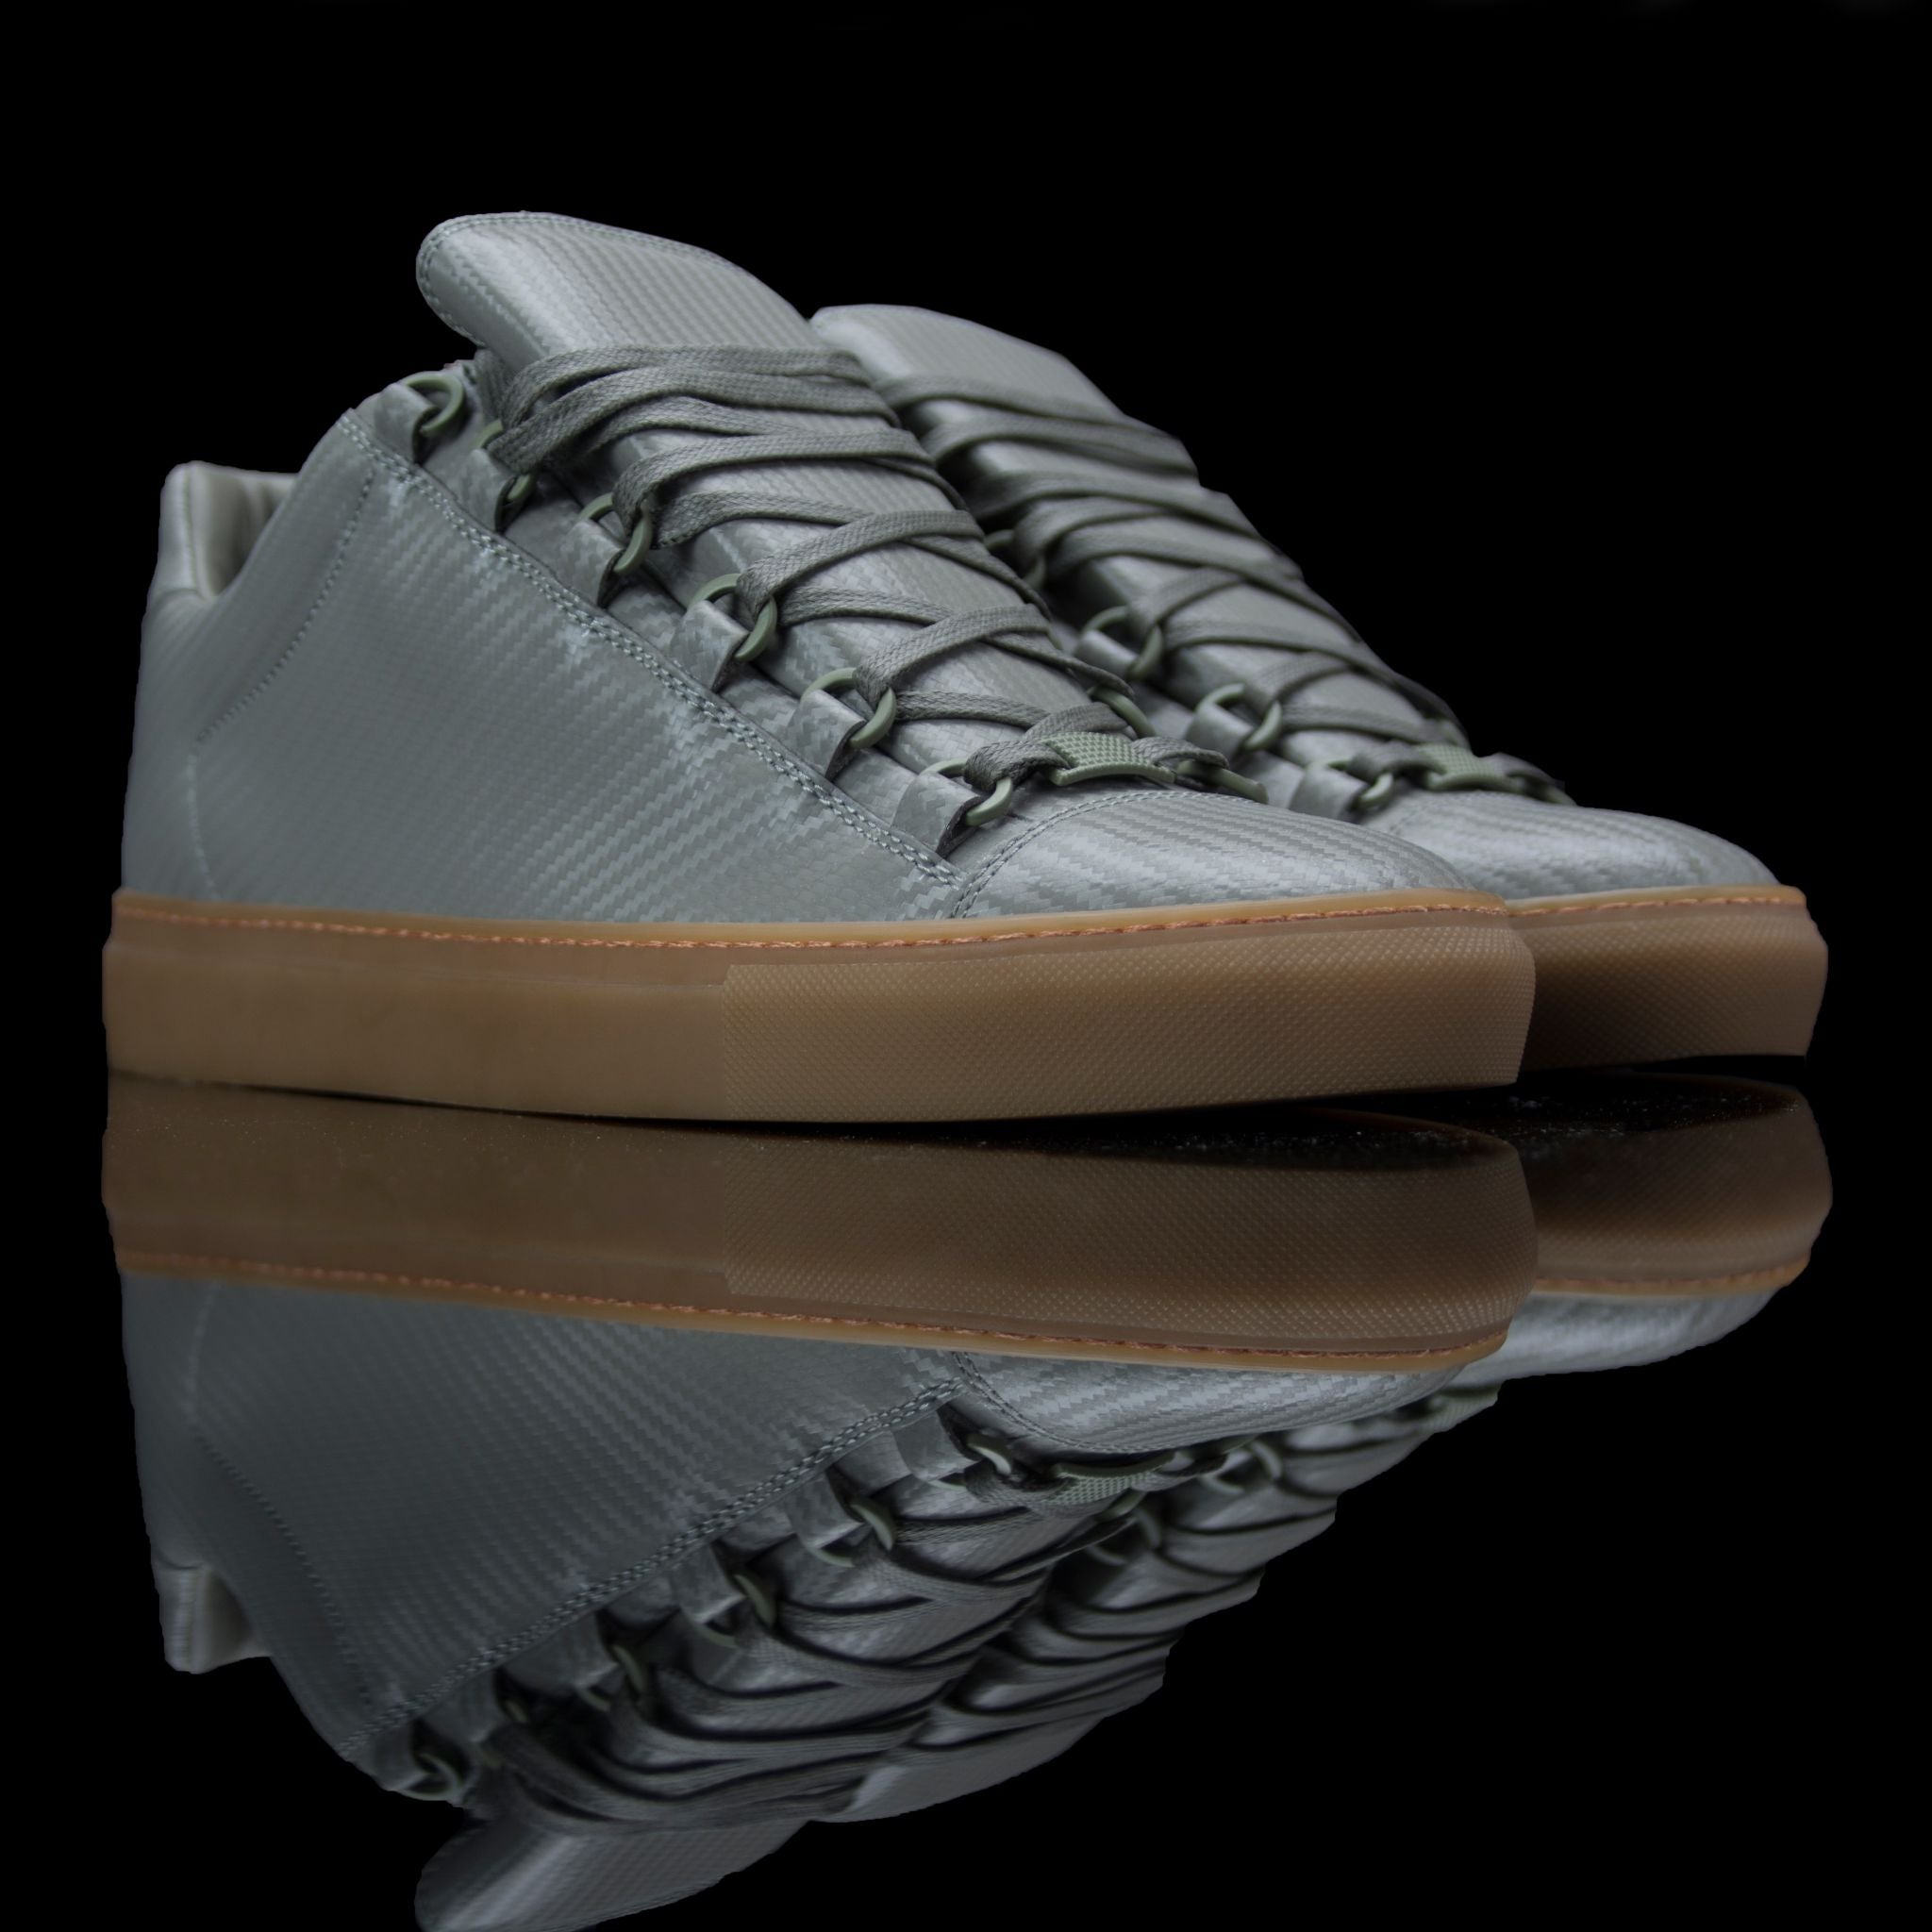 Balenciaga-Arena-Product Code: Colour: Khaki Carbon Fibre - Gum Sole Discontinued Material: Leather, Rubber Sole BALENCIAGA, the Paris based label drops the Arena Low. The casual sneakers are composed in Khaki Carbon Fibre Leather and Gum Sole. Also, the 